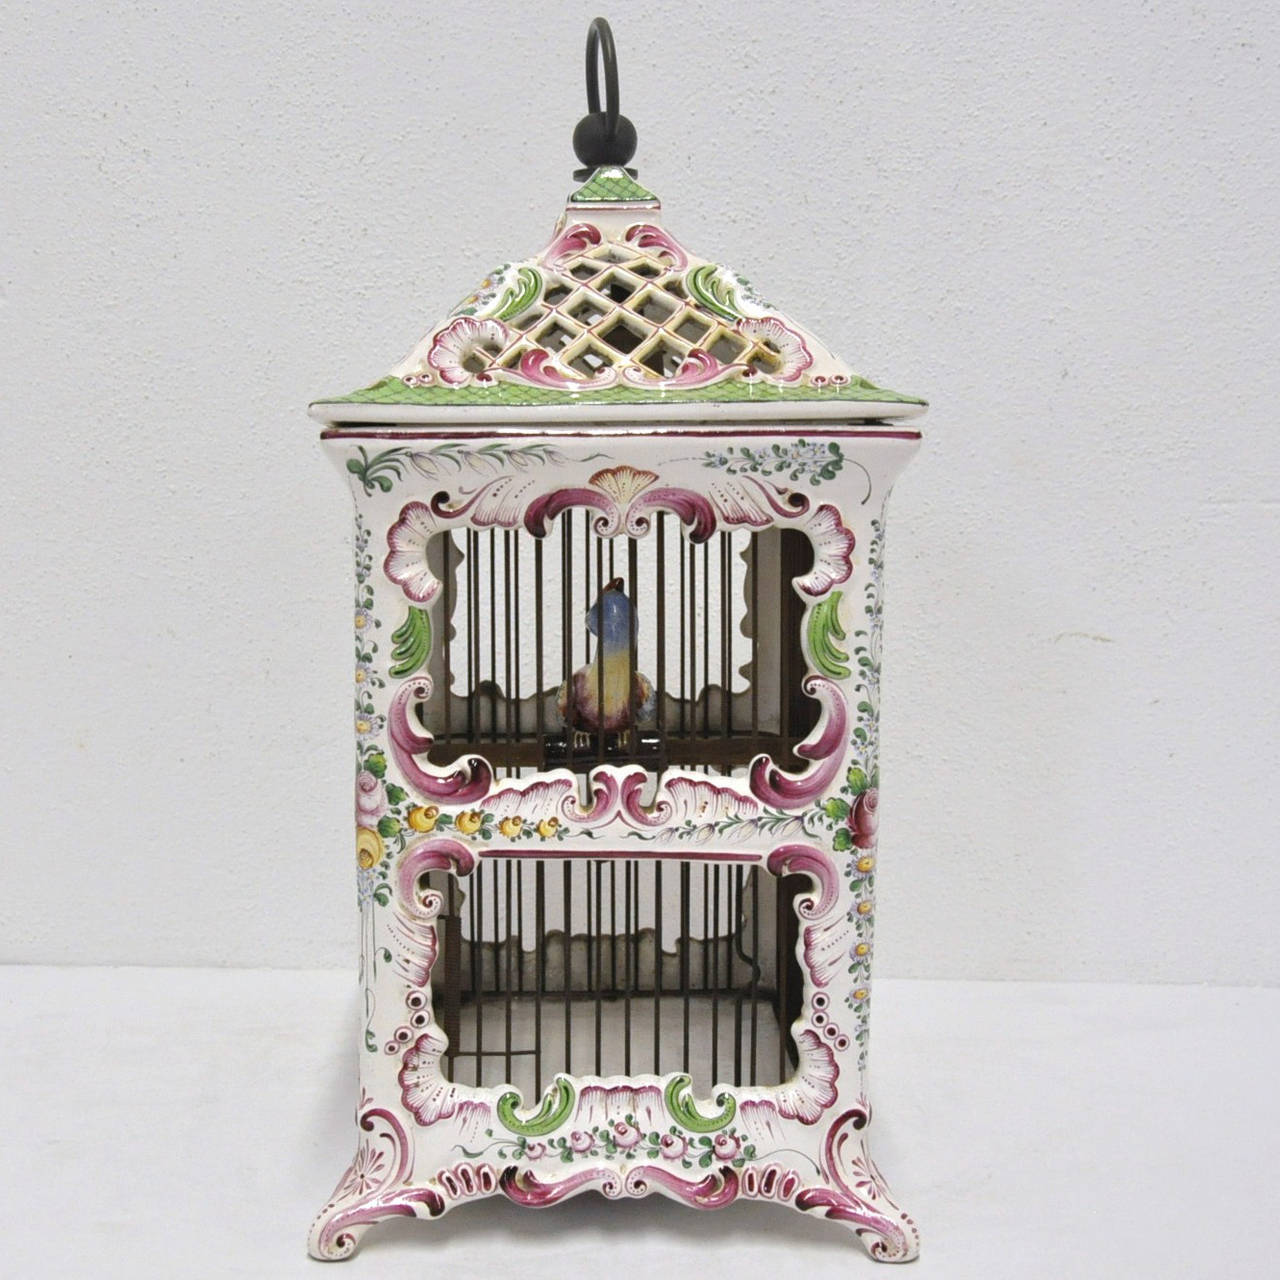 Hand-Crafted 19th Century, French, Hand-Painted Porcelain Birdcage Lamp from Paris